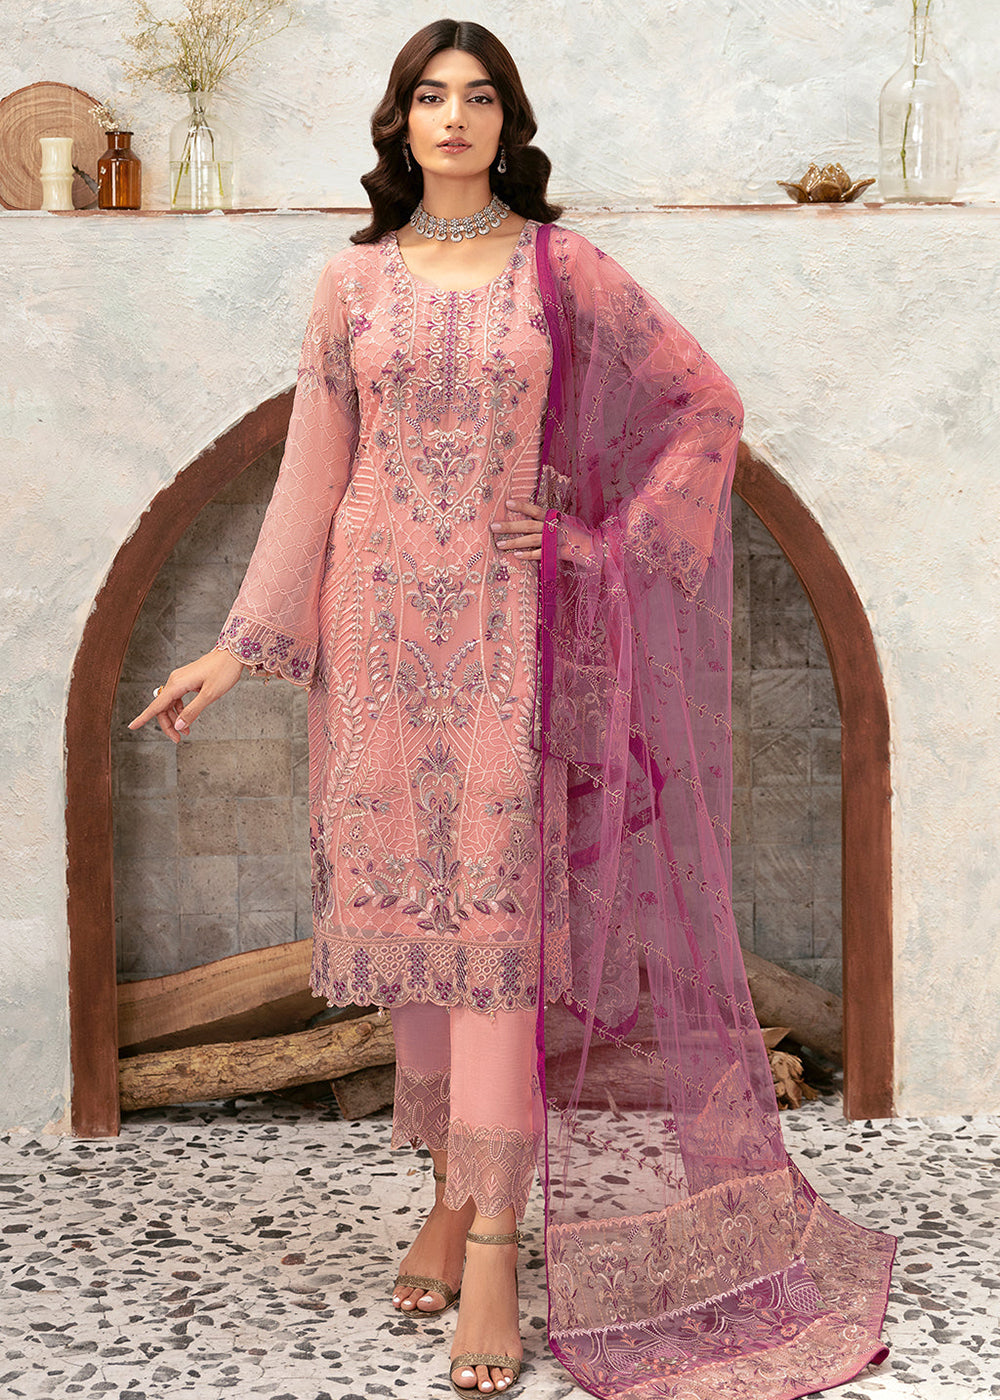 Buy Now Rangoon Chiffon Collection 24 by Ramsha | D-1201 Online at Empress in USA, UK, Canada, Germany, Italy, Dubai & Worldwide at Empress Clothing.